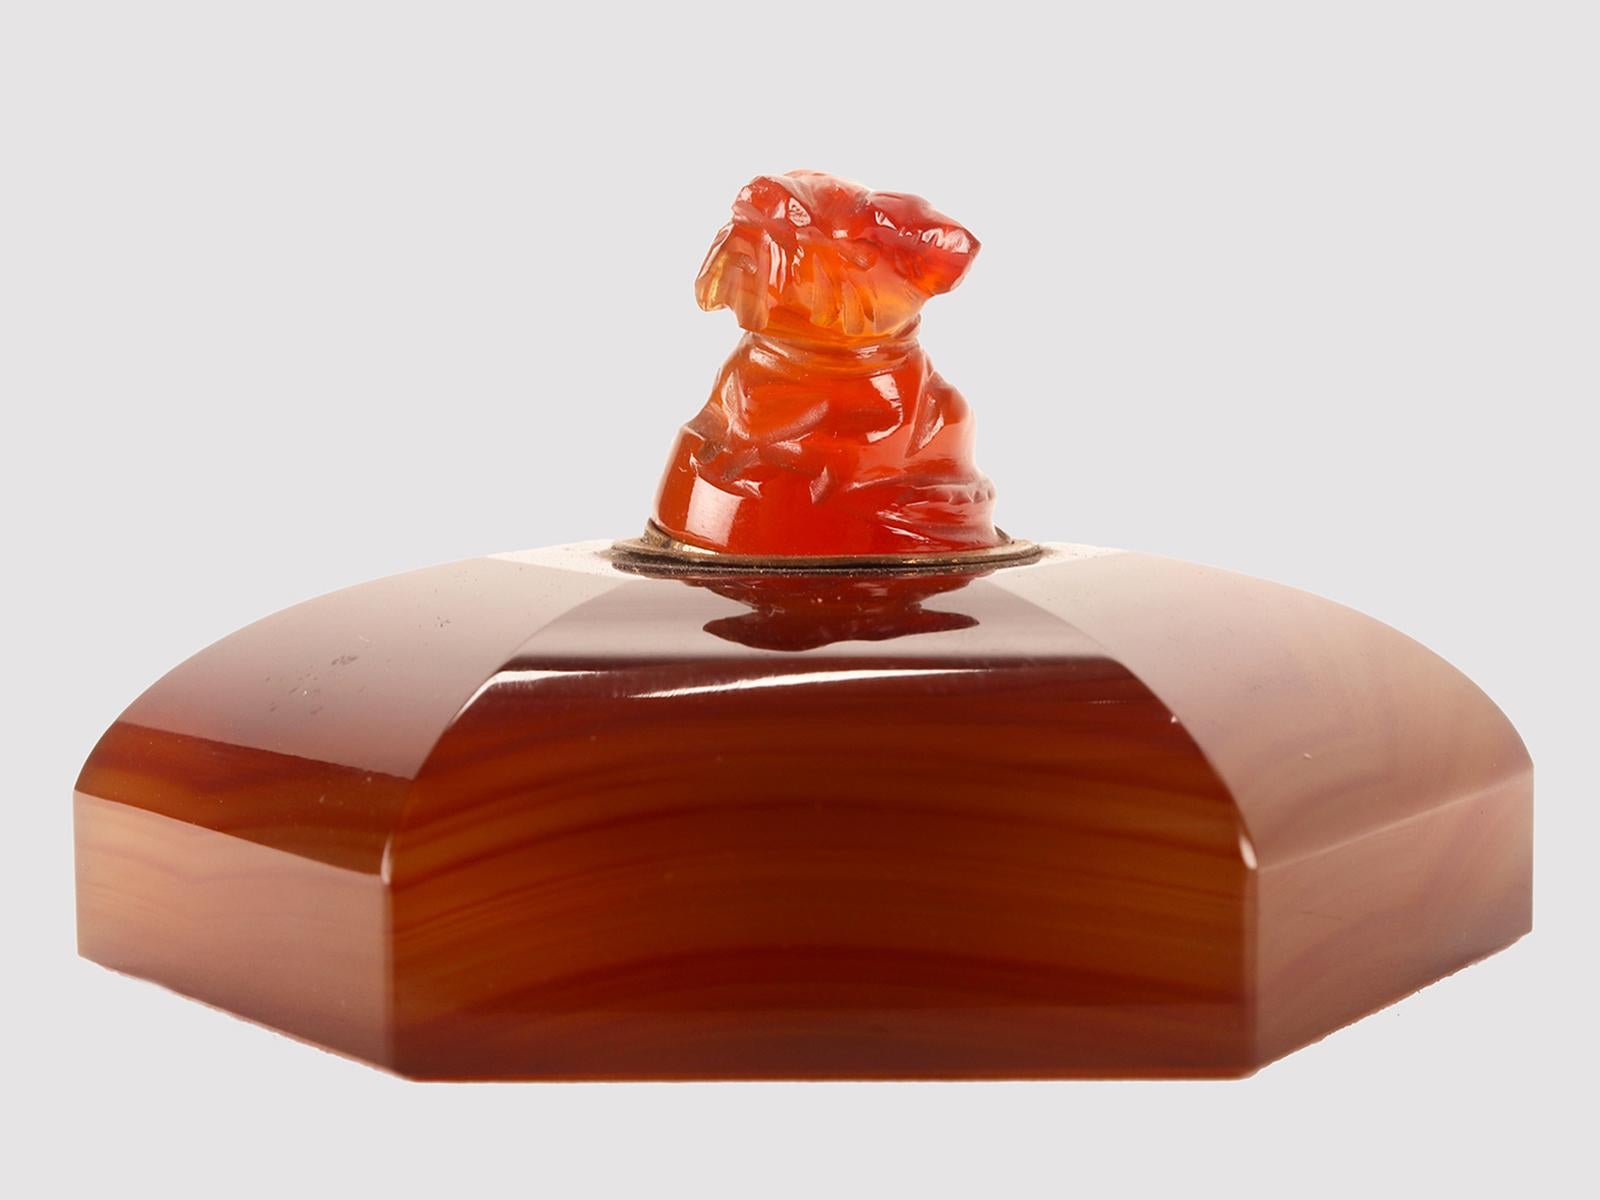 An agate table switch featuring a small terrier dog. The switch is carved and sculpted entirely in agate and carnelian. The body of the switch has a hexagonal base, the profile rises briefly to then curve towards the center and converge towards the